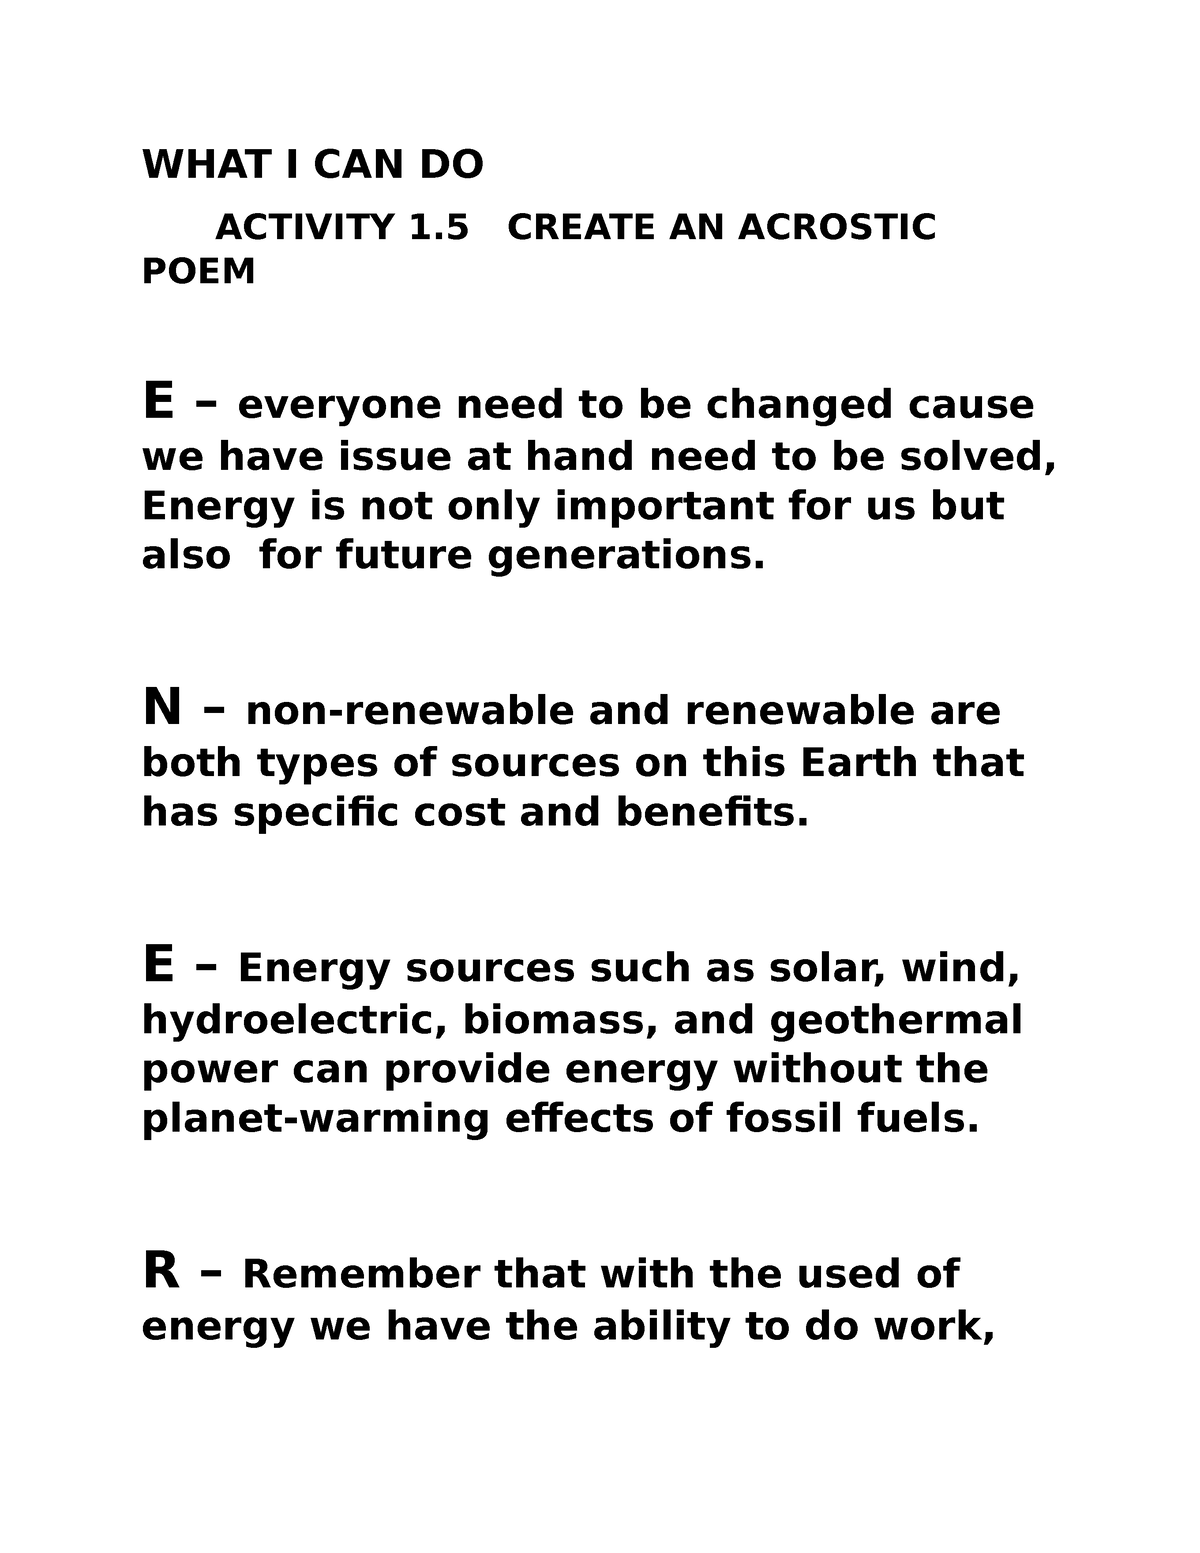 acrostic-poem-about-energy-what-i-can-do-activity-1-create-an